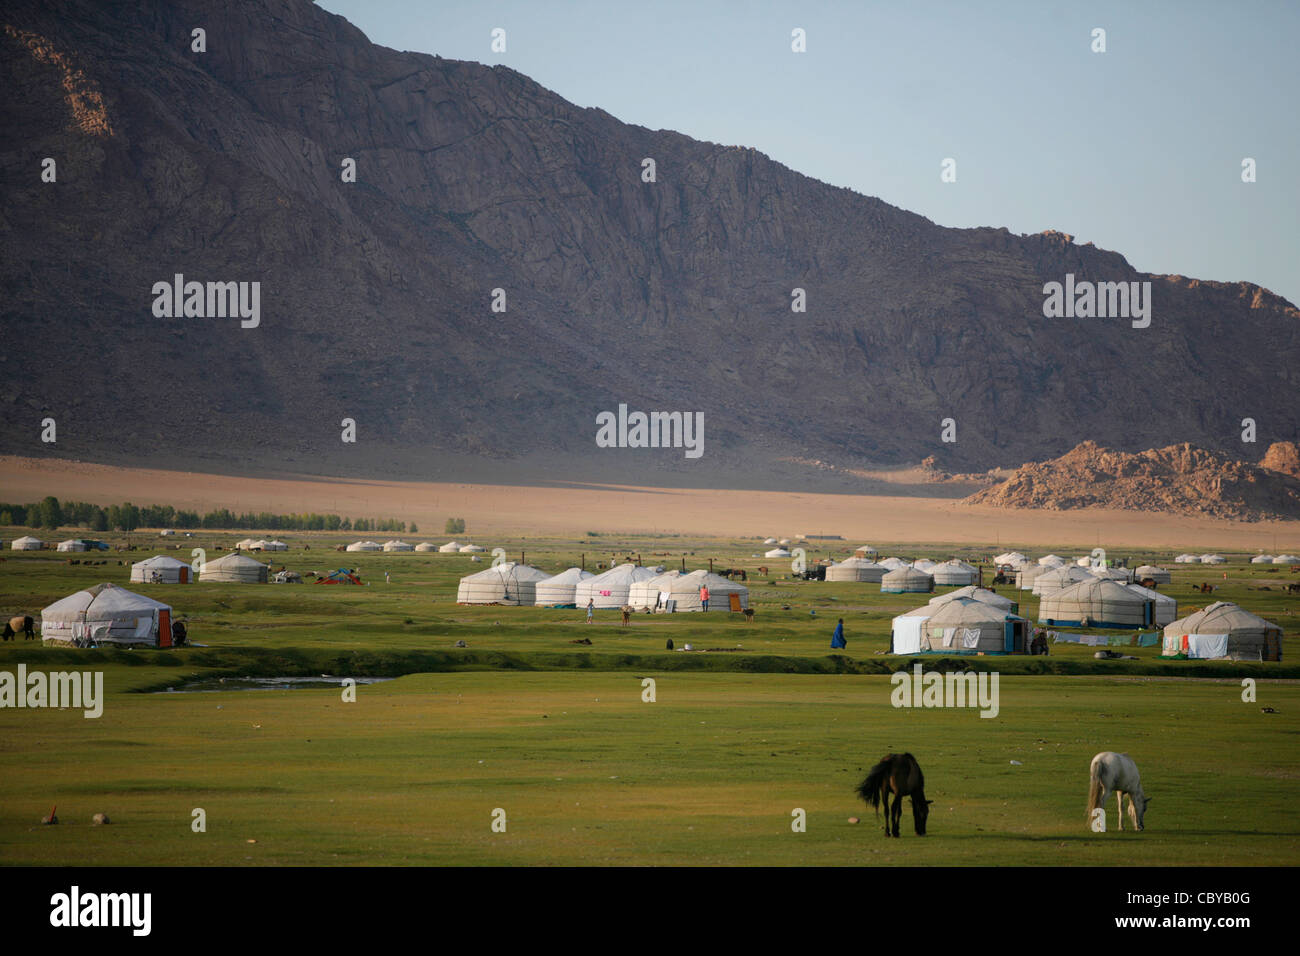 Goats and yurts on a green field in Mongolia Stock Photo